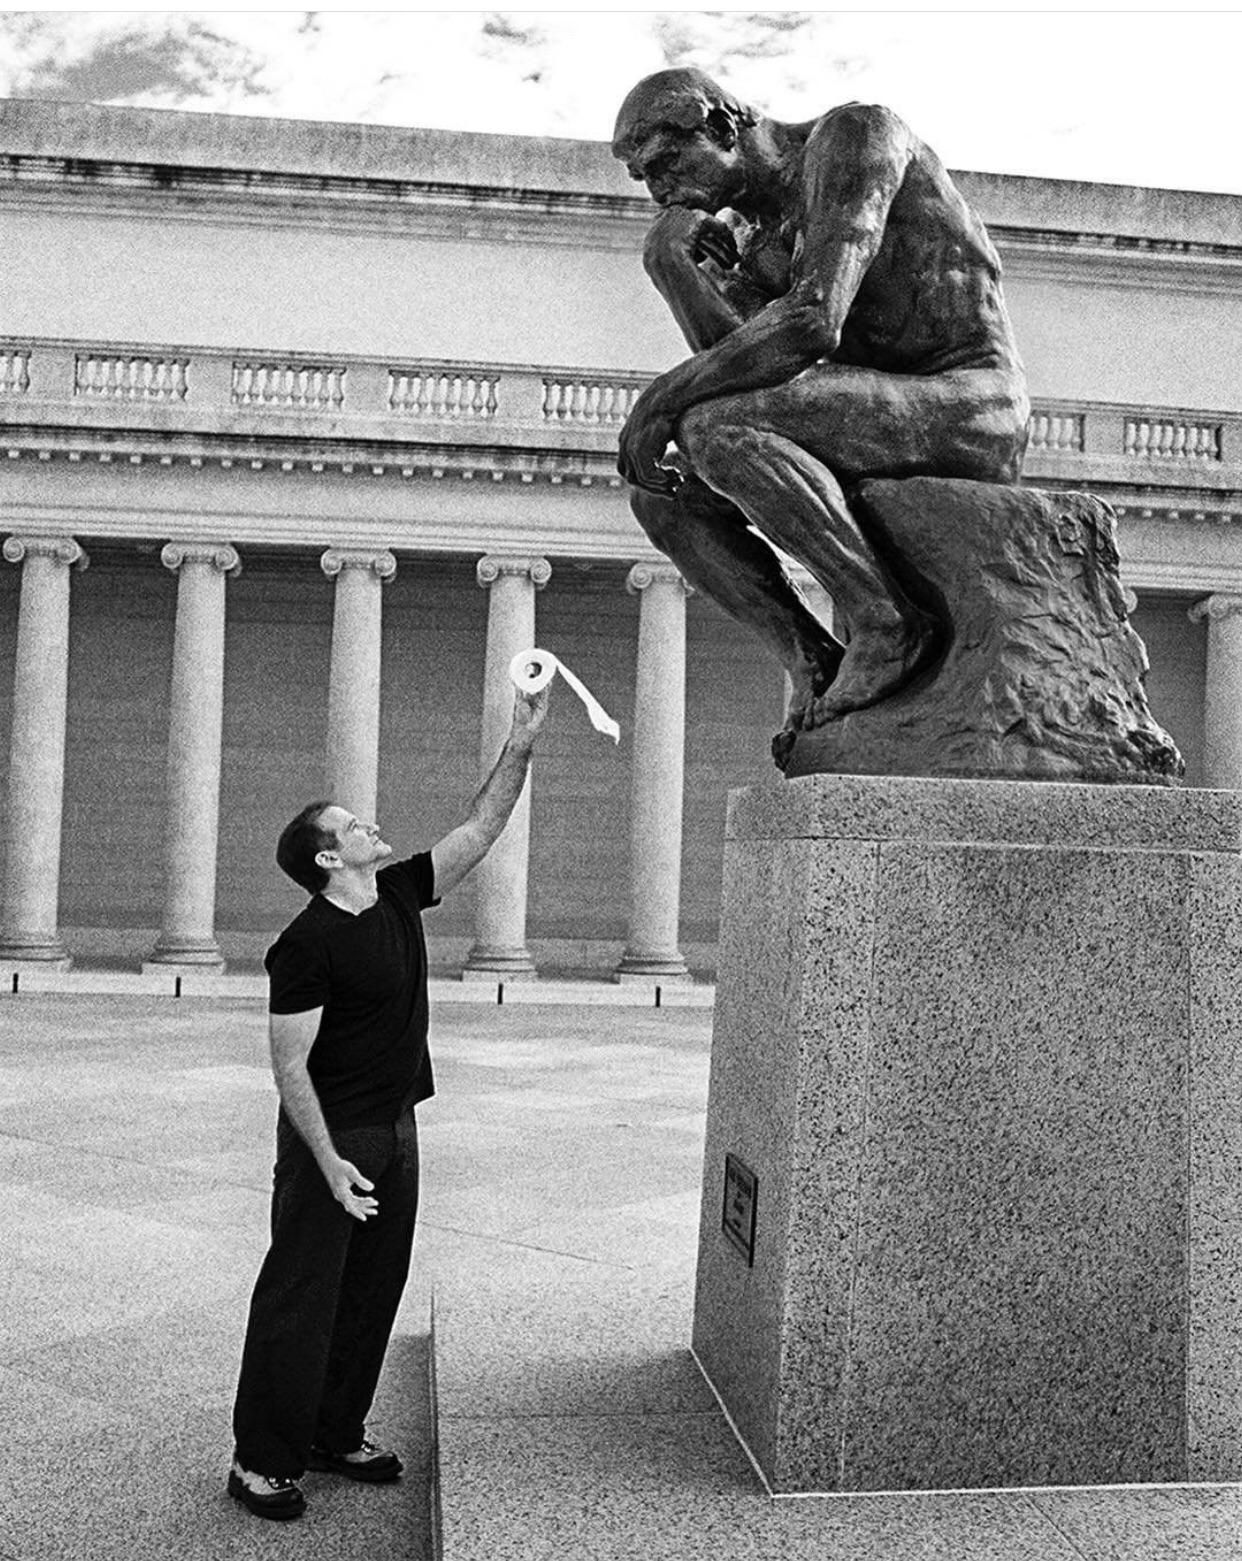 Robin Williams offering a toilet roll to ’ The Thinker’